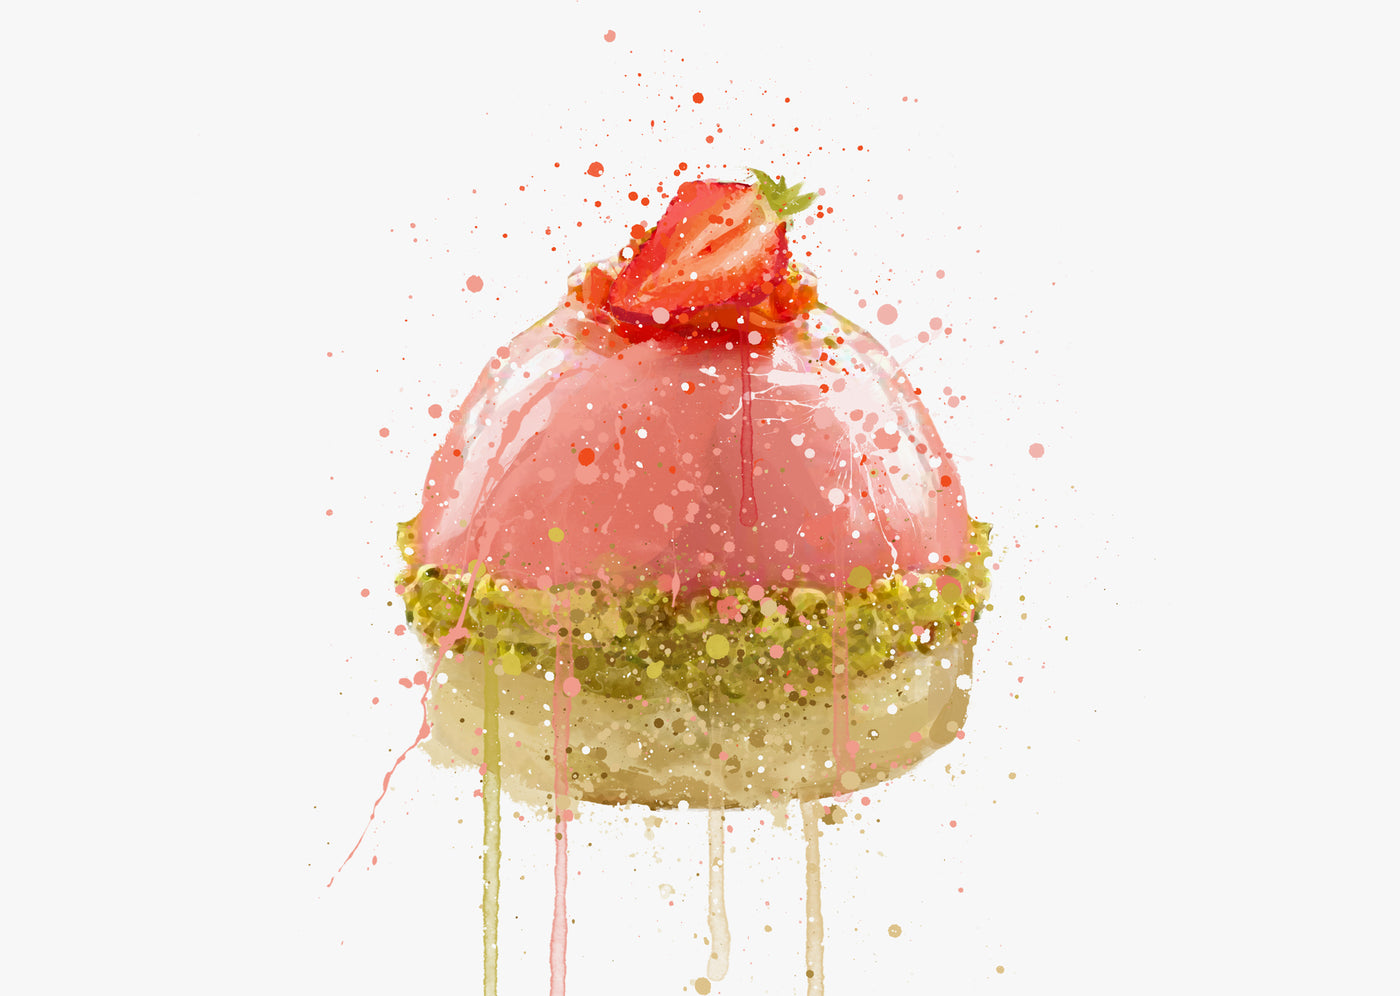 Patisserie Wall Art Print ‘Strawberry and Pistachio Dome’ (Horizontal)